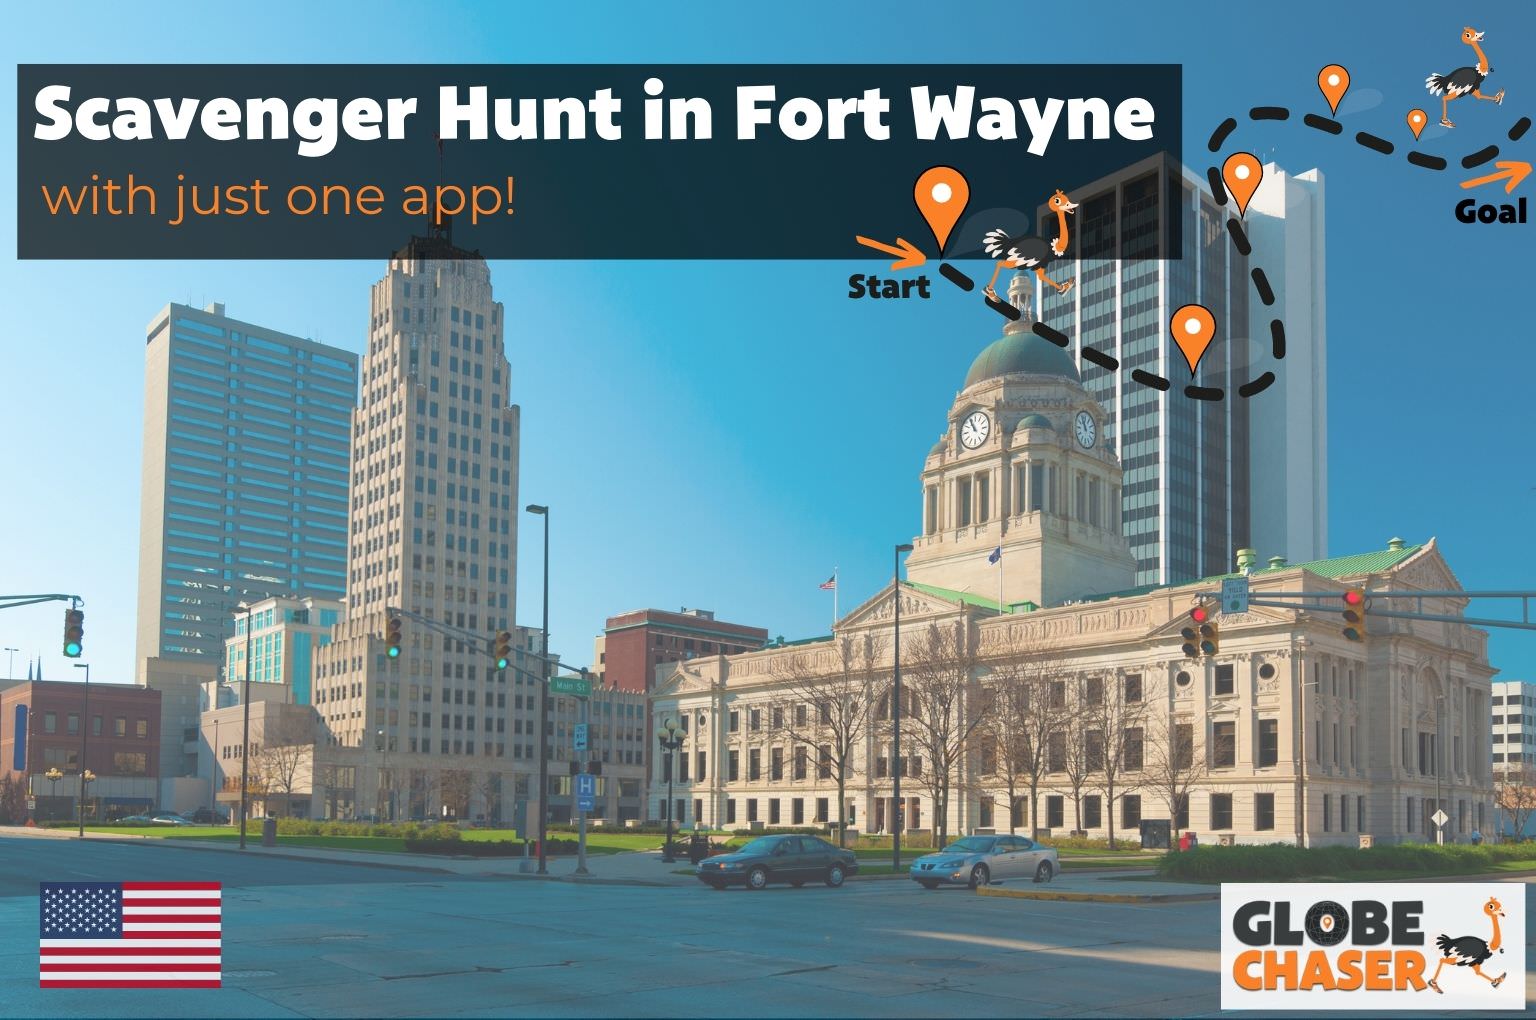 Scavenger Hunt in Fort Wayne, USA - Family Activities with the Globe Chaser App for Outdoor Fun